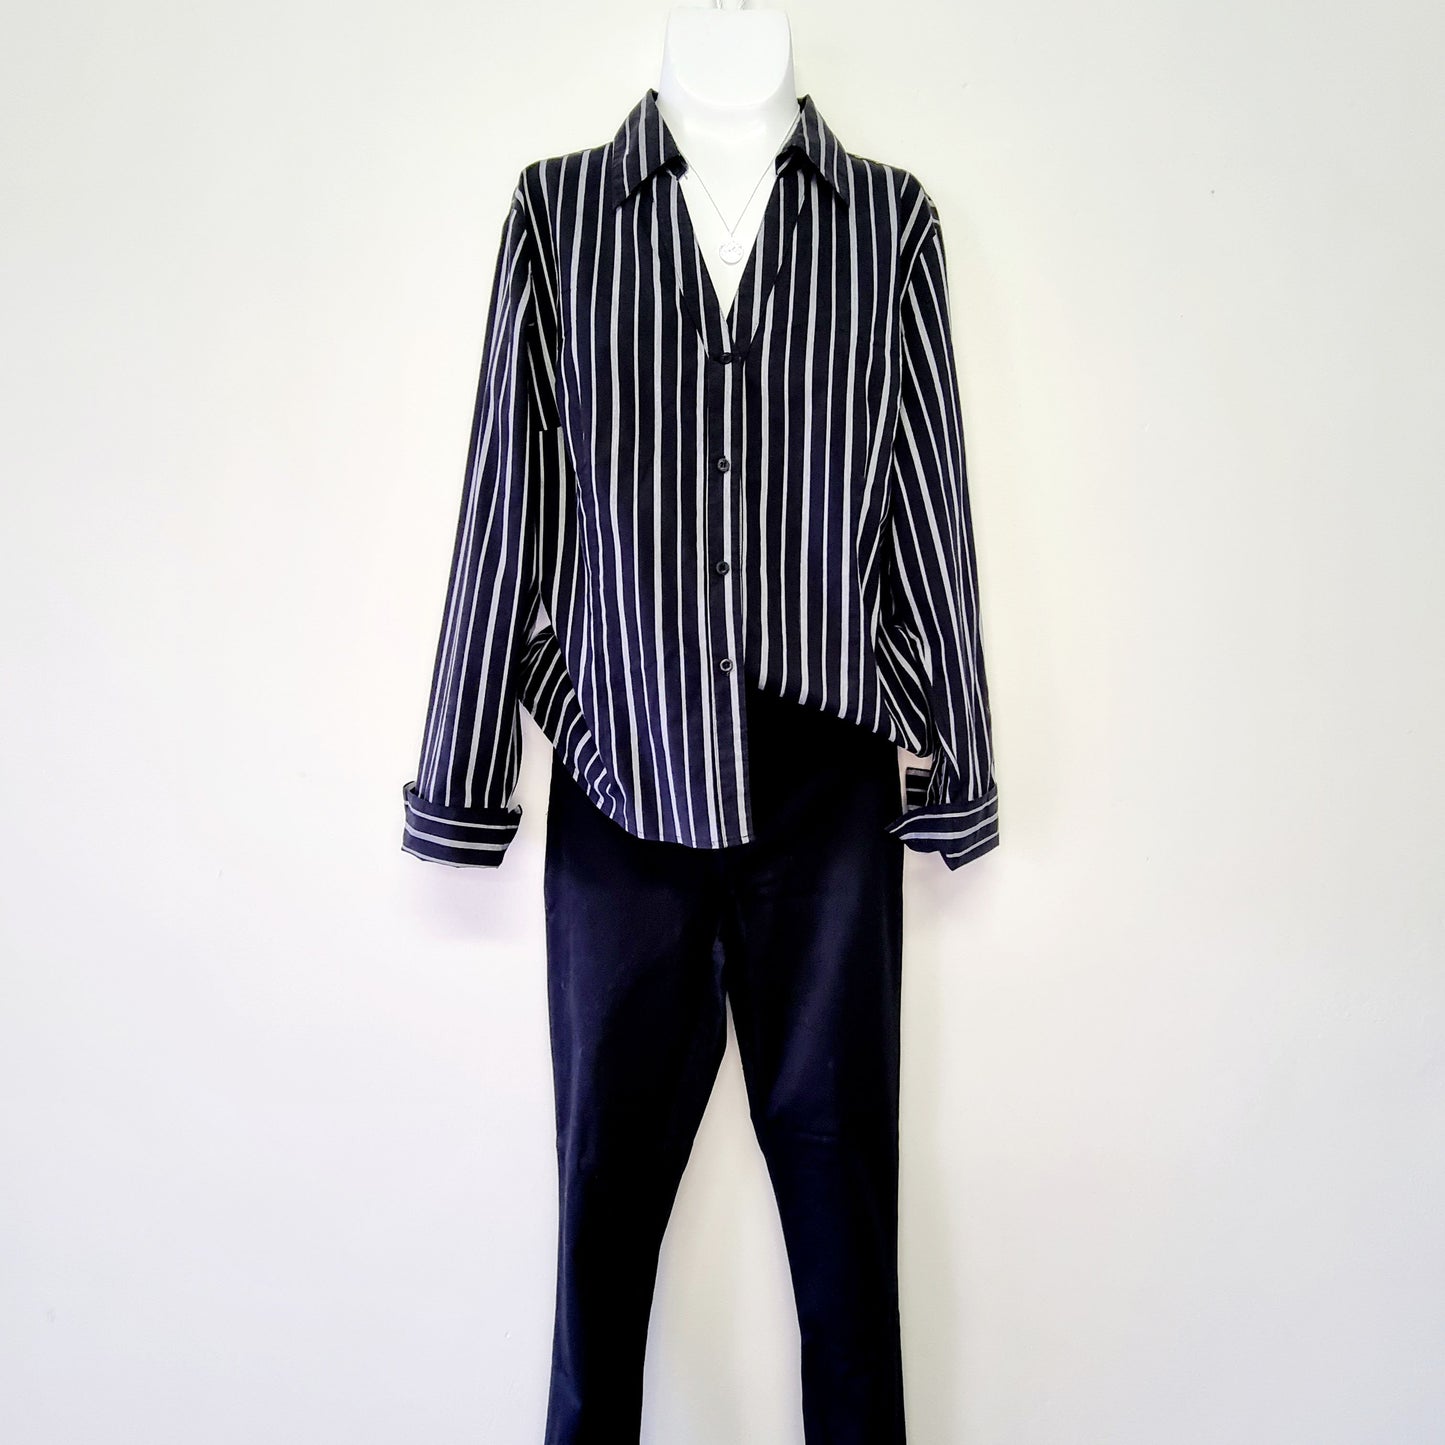 Kelso - Black striped long sleeved collared shirt